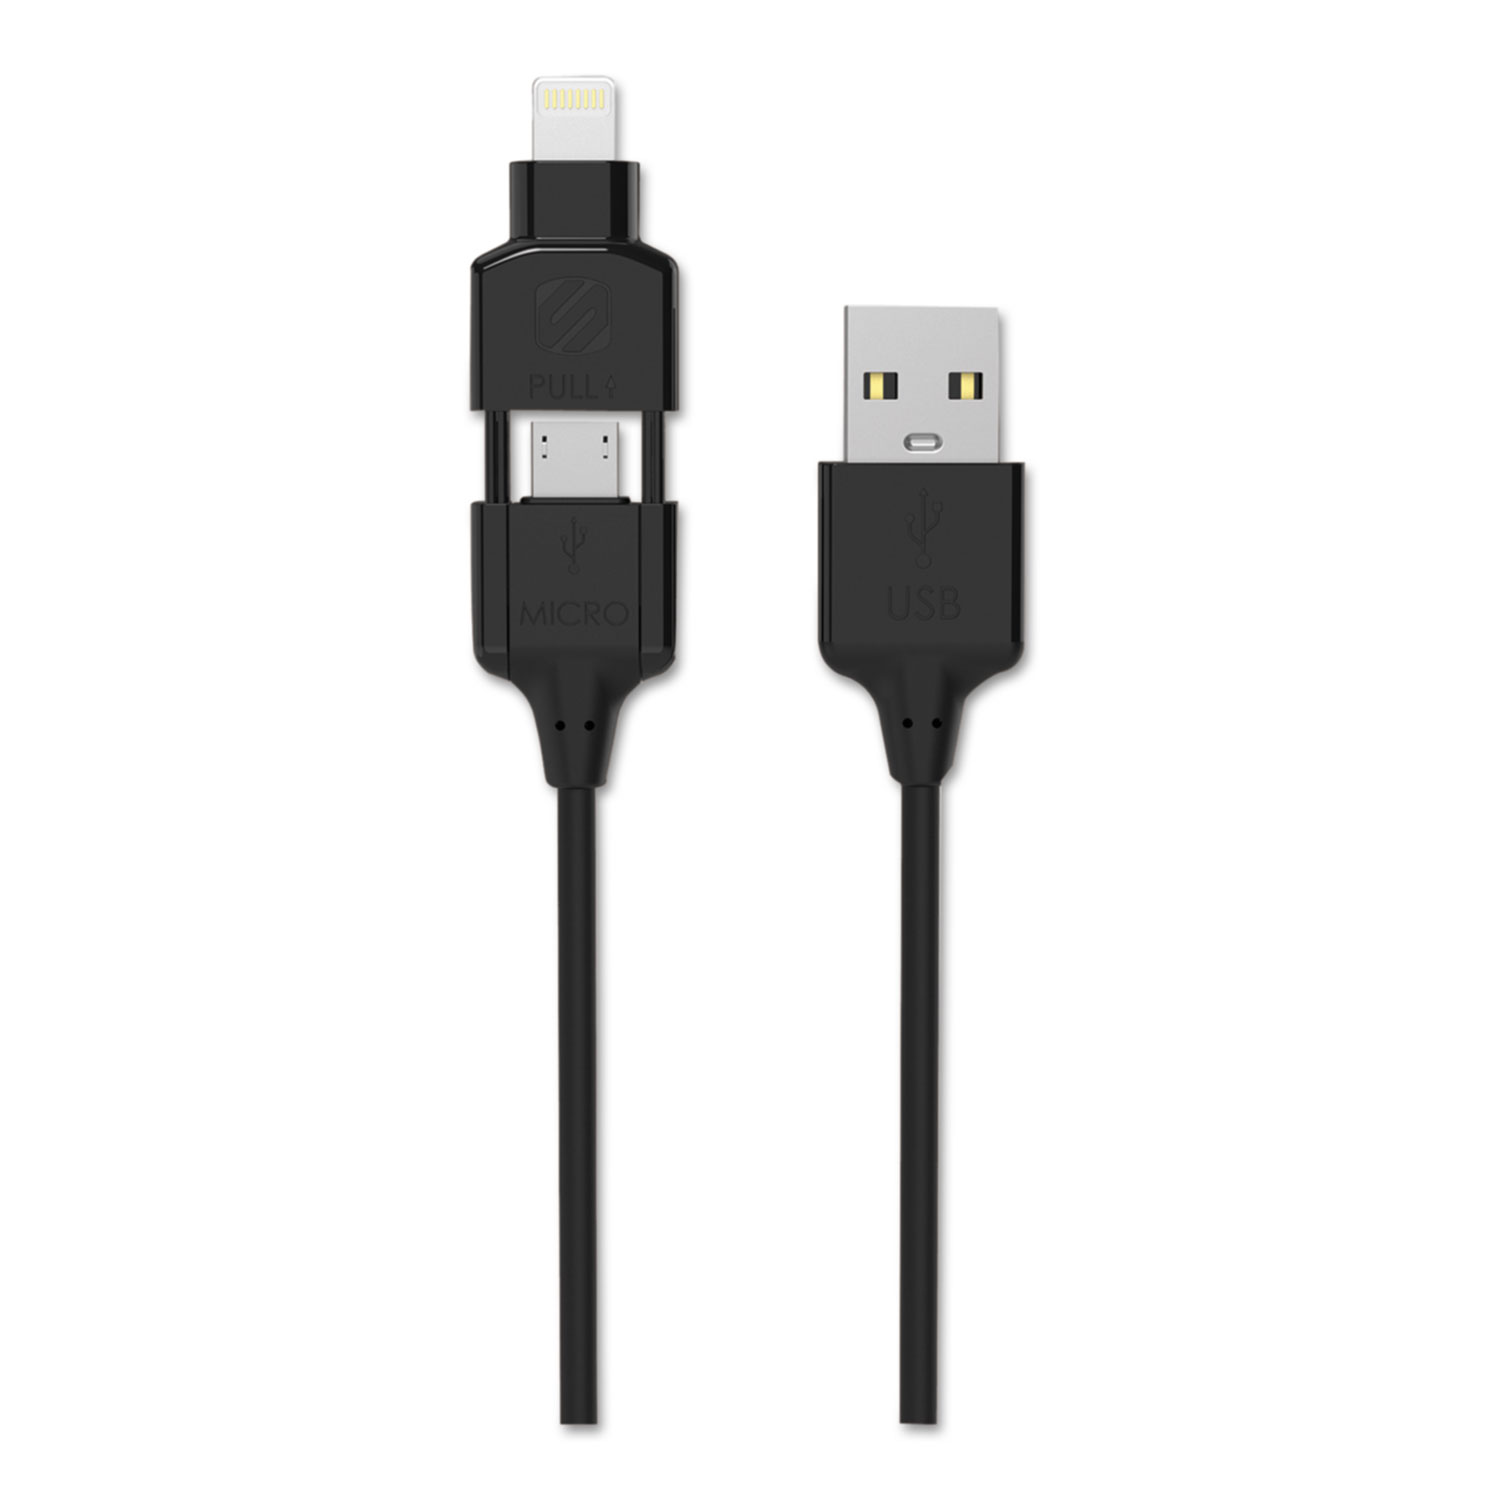 smartSTRIKE Charge/Sync Cable for Lightning Micro USB Devices, 3 ft